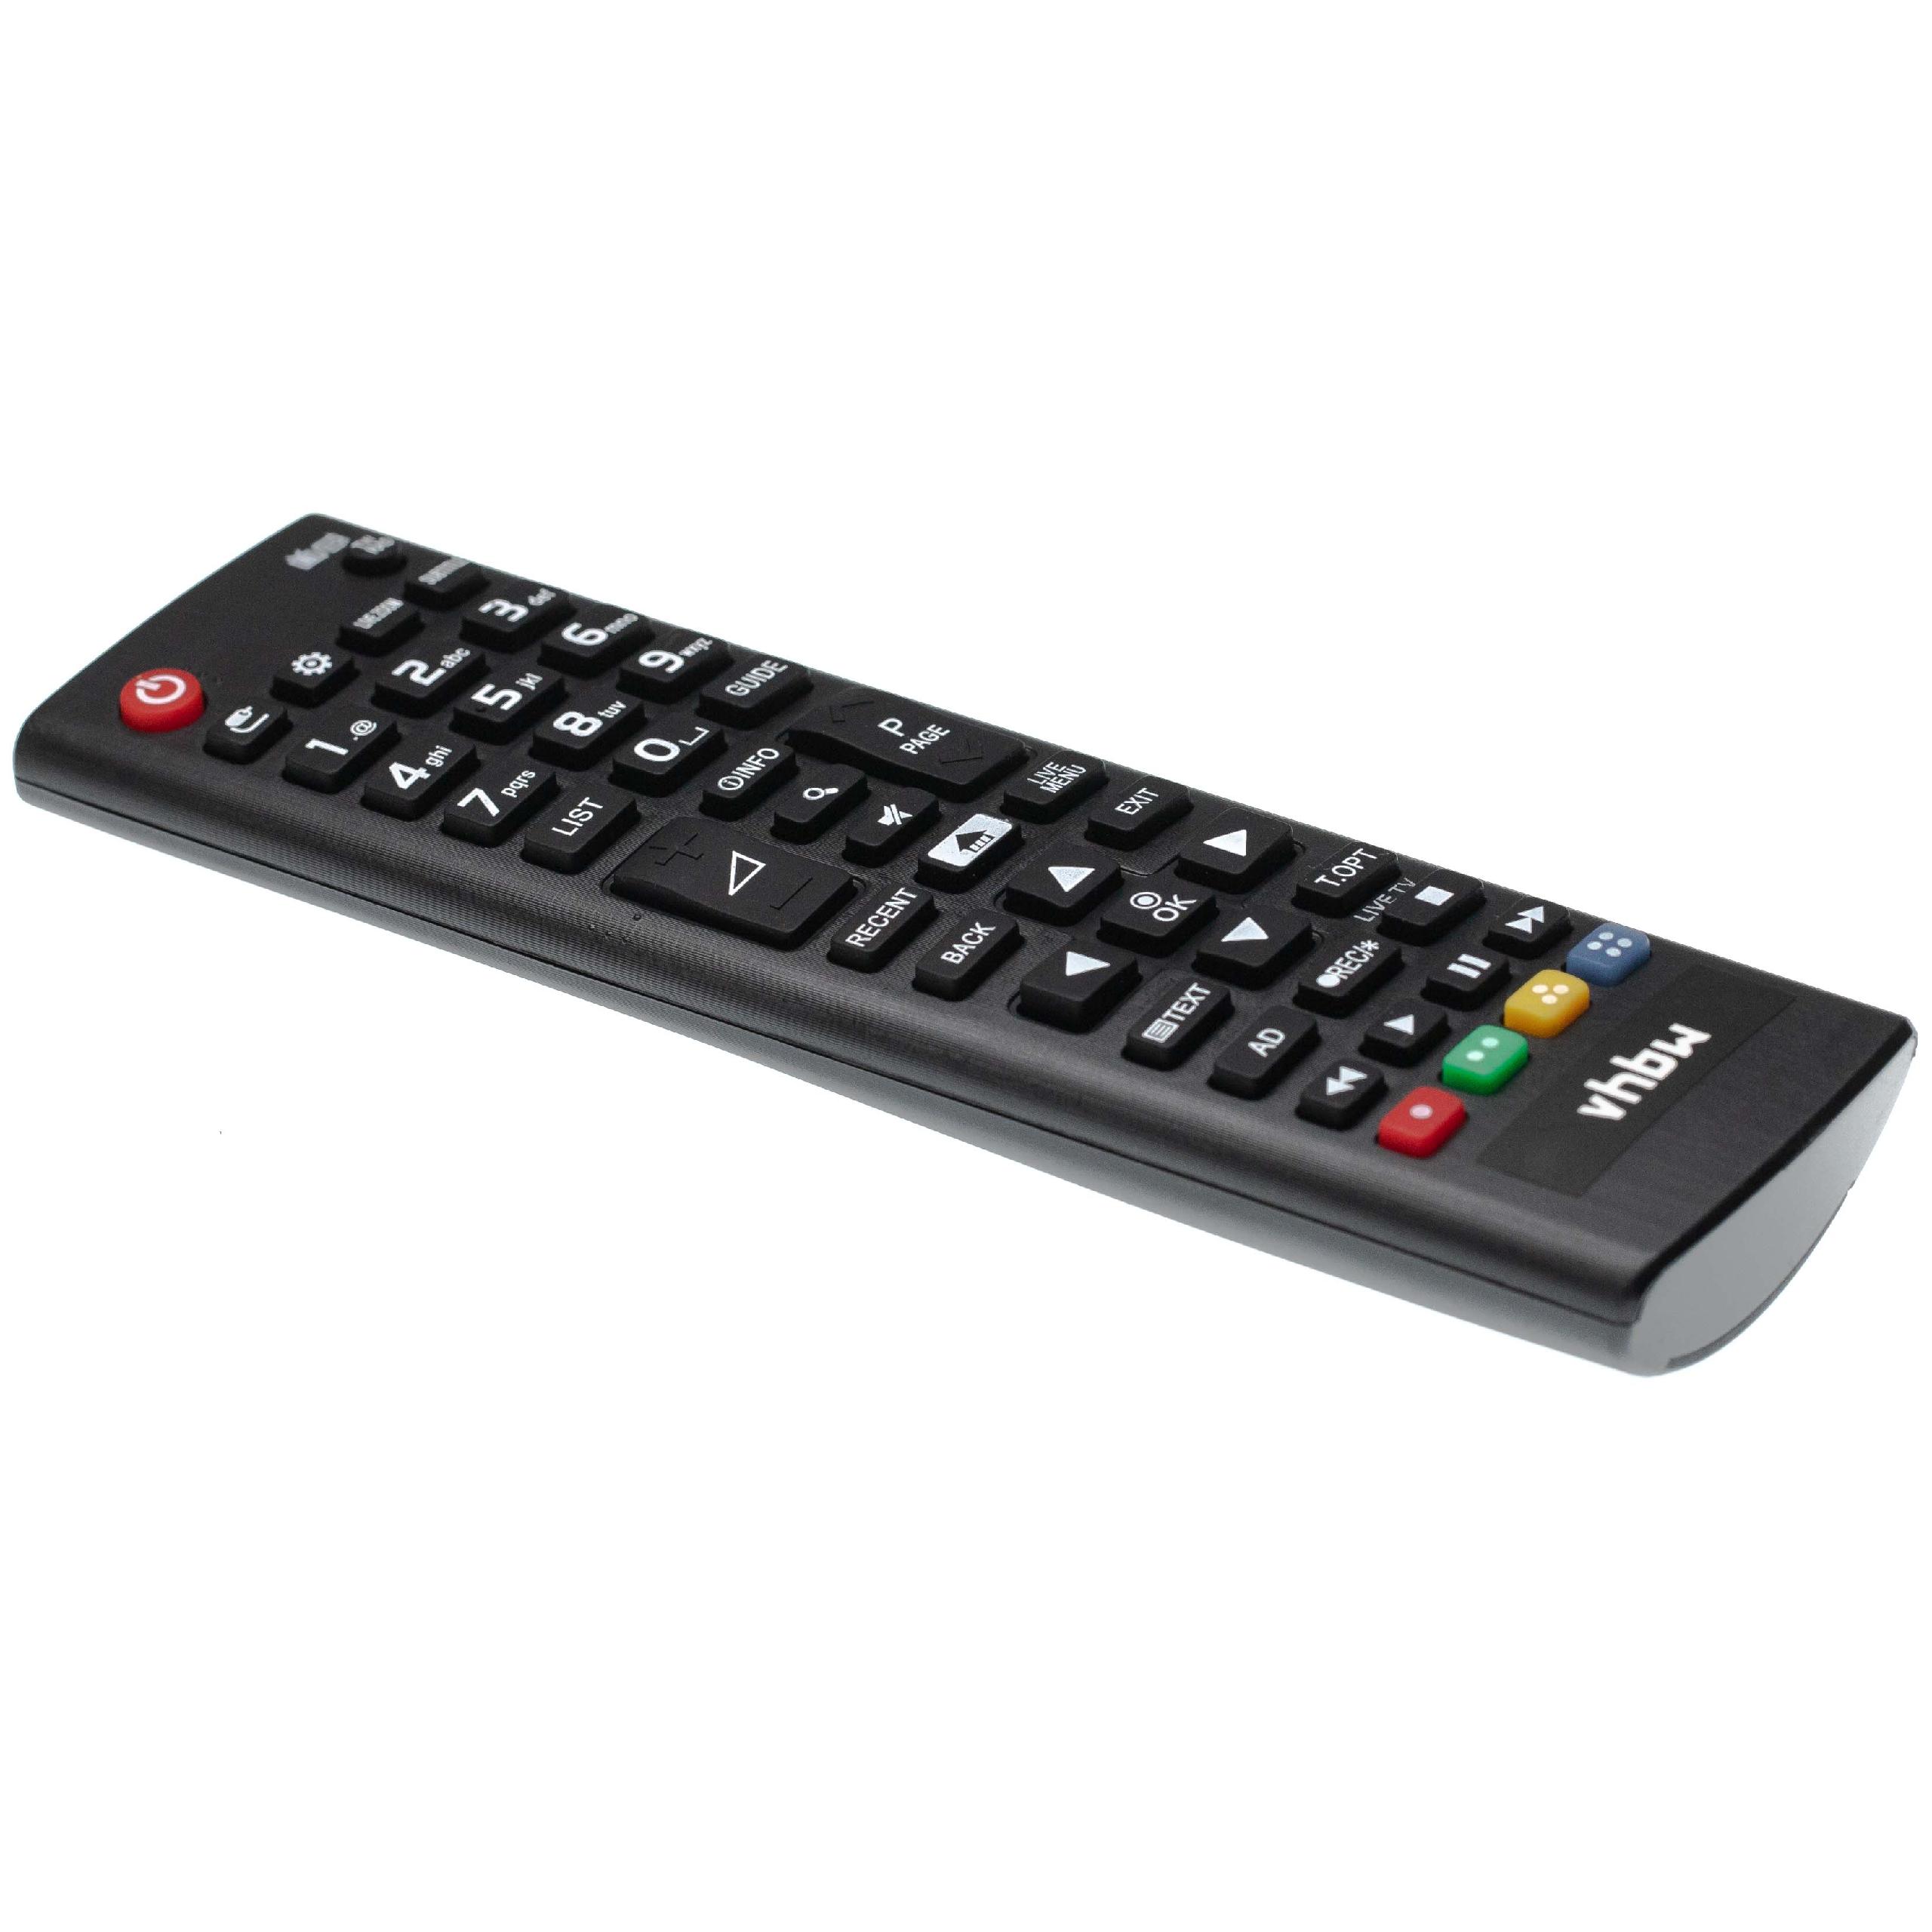 Remote Control replaces LG AKB74915324 for LG TV